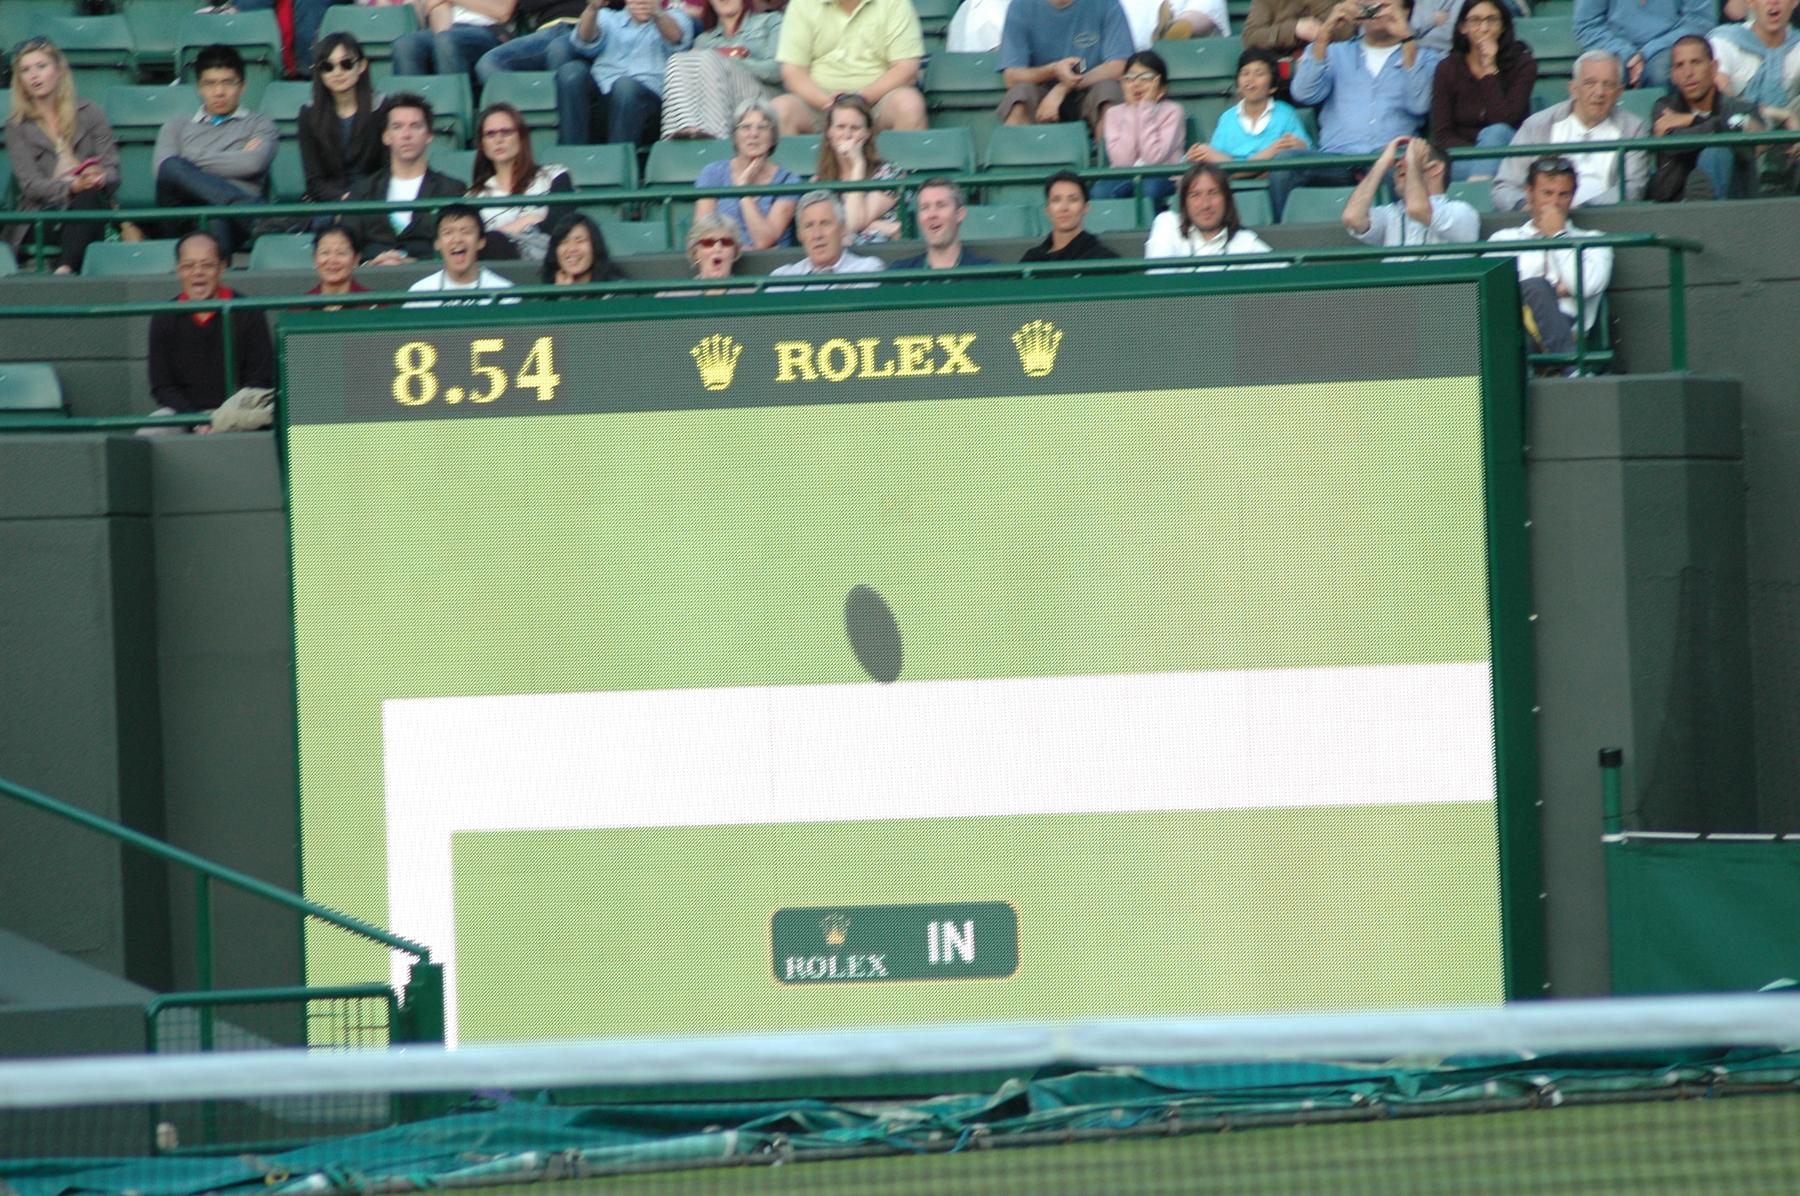 File:The decision of In or Out with the help of Technology at Wimbledon.jpg - Image of Technology, T